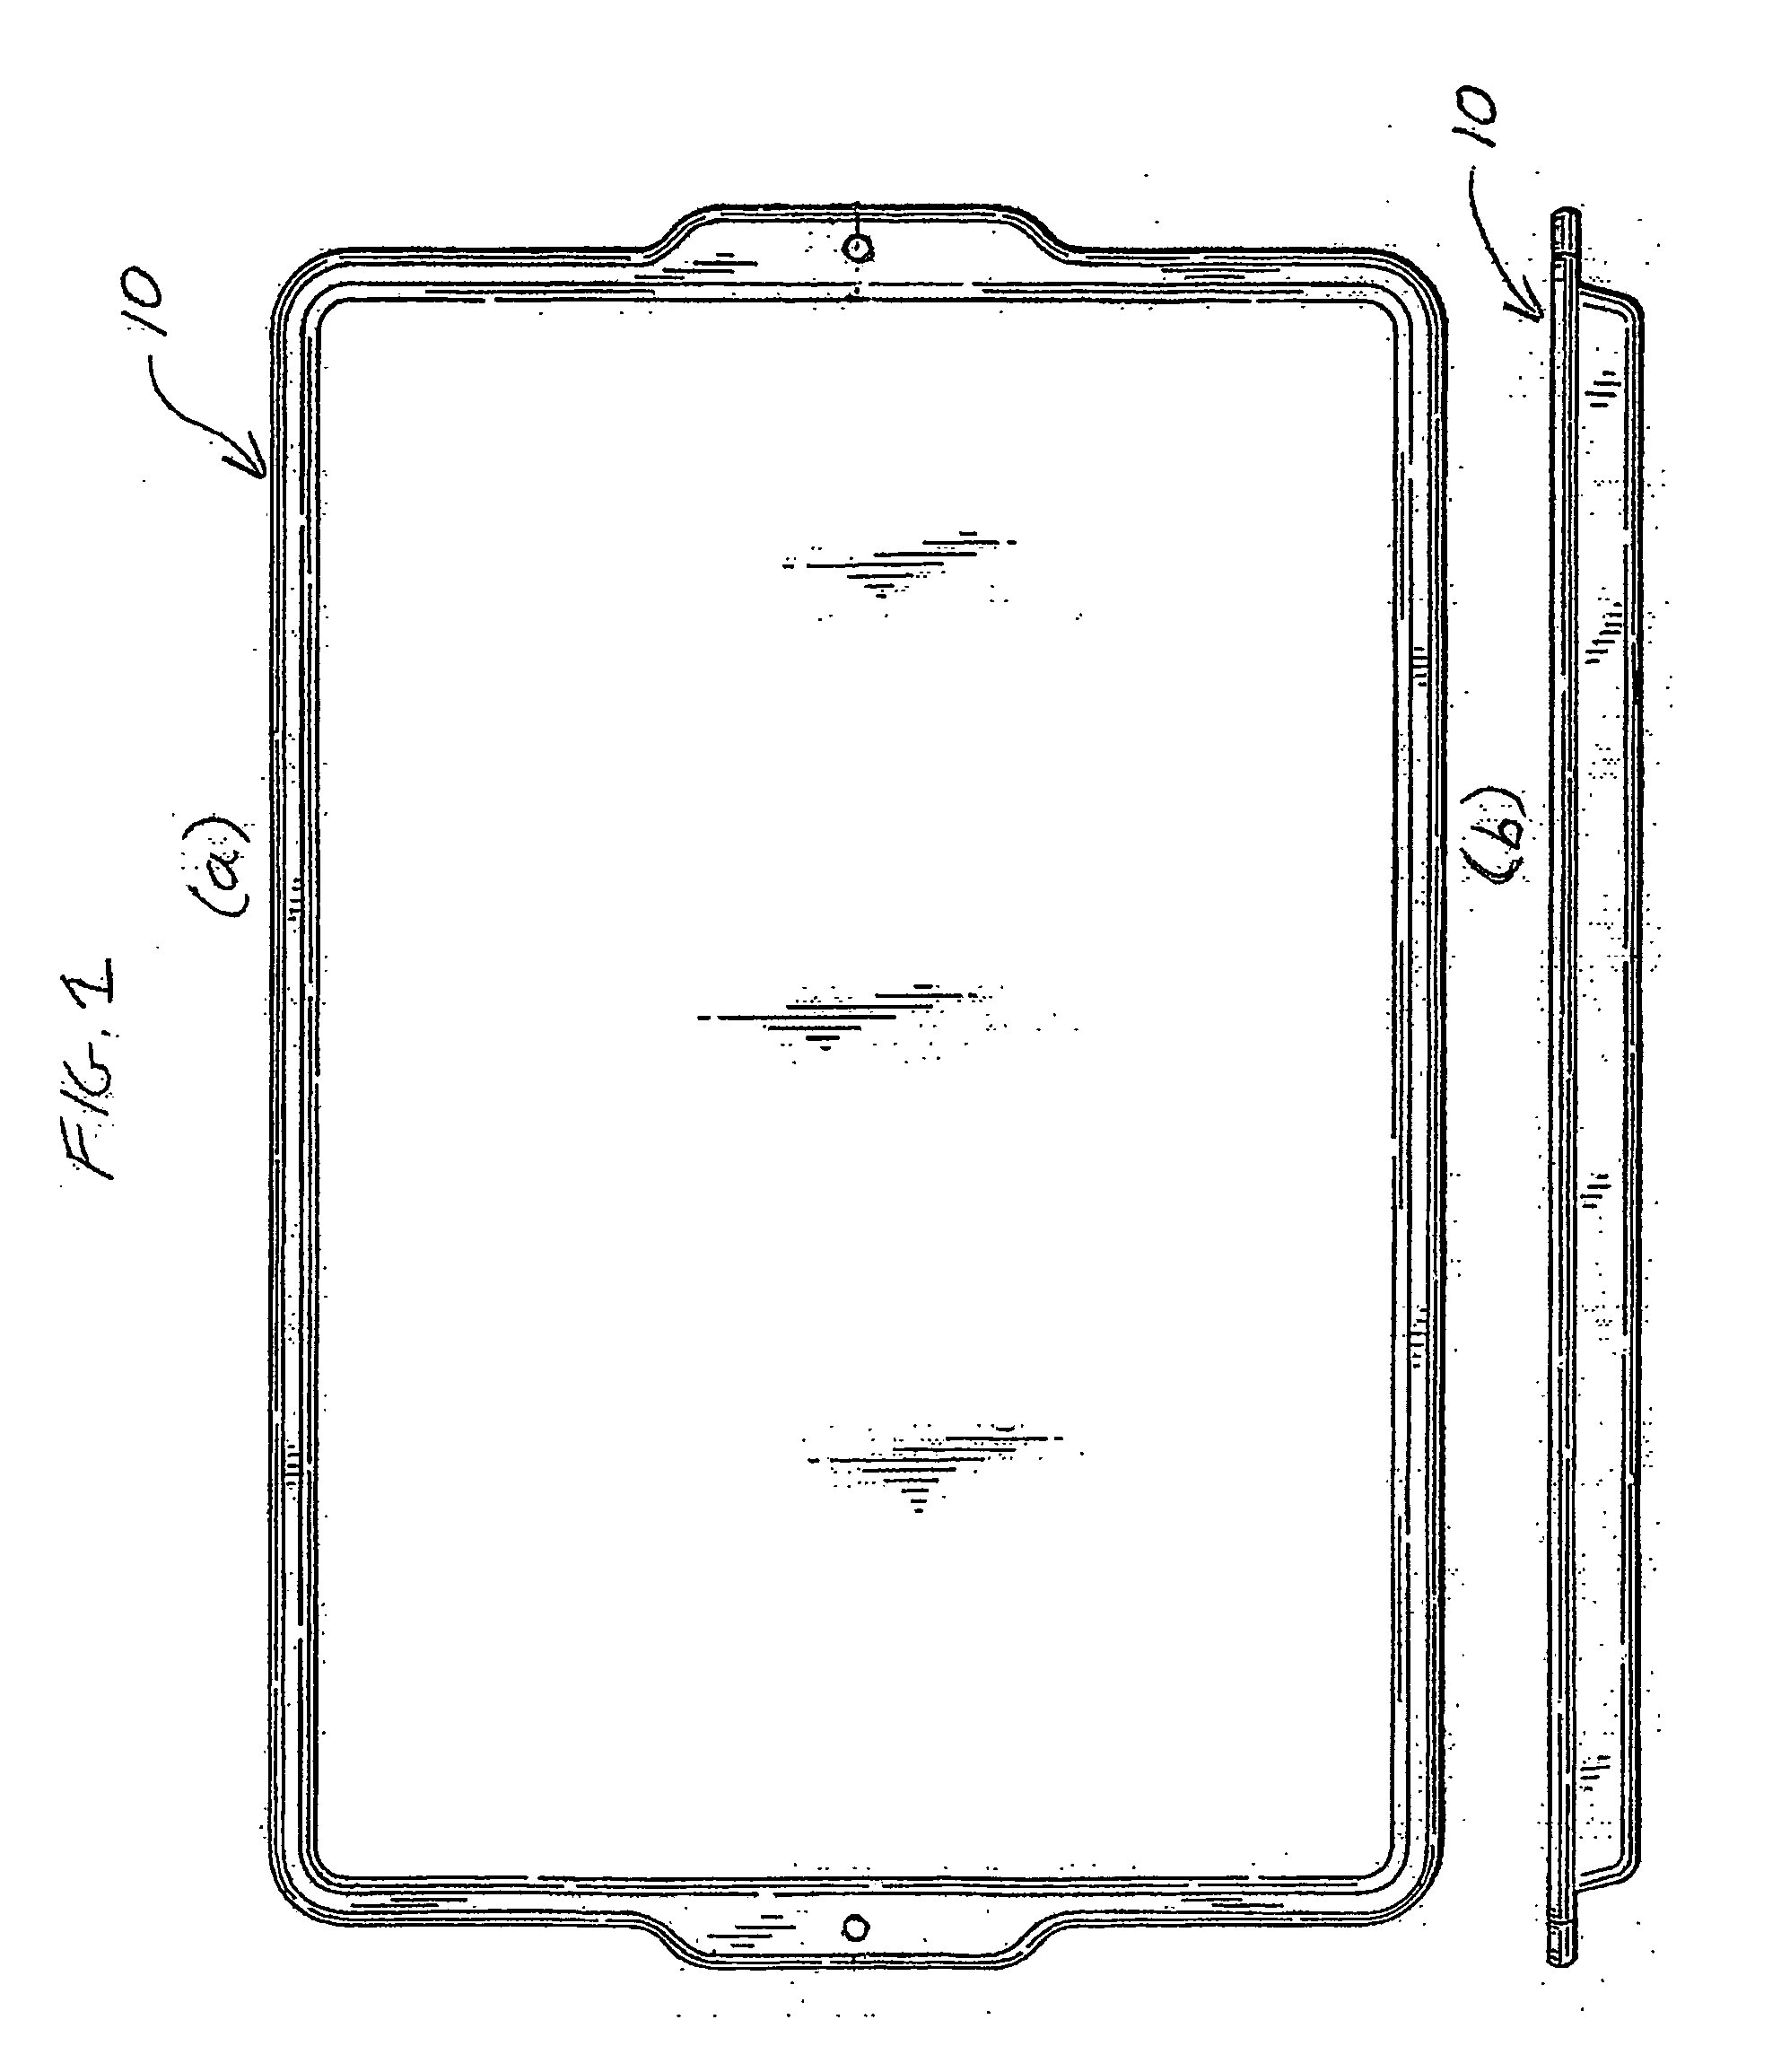 Thermally conductive liquid crystalline polymer compositions and articles formed therefrom